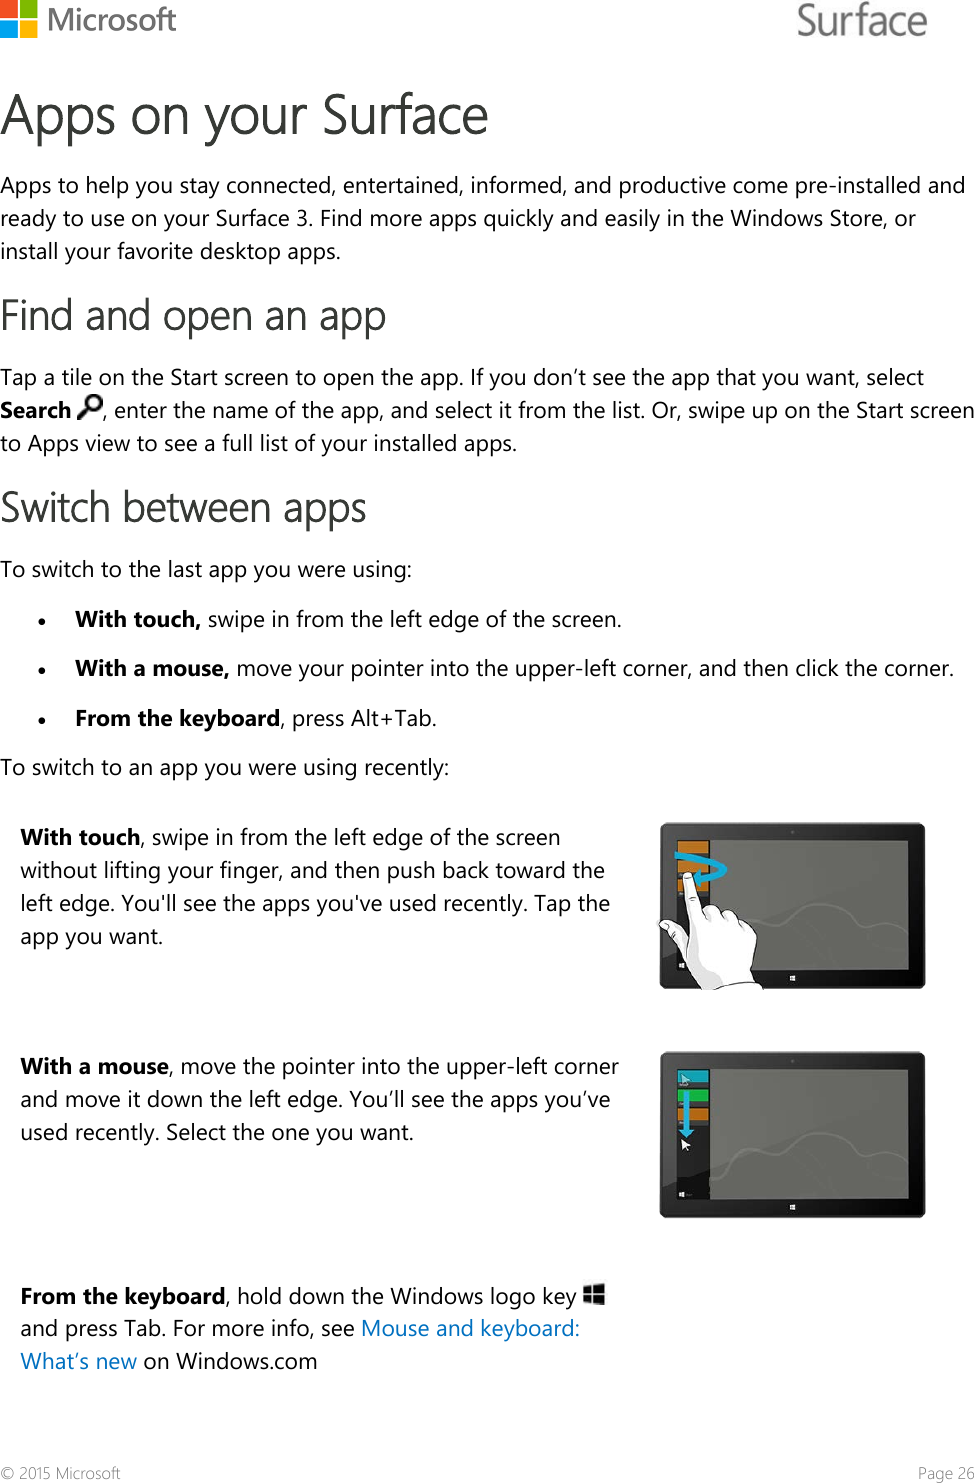    Apps on your Surface  Apps to help you stay connected, entertained, informed, and productive come pre-installed and ready to use on your Surface 3. Find more apps quickly and easily in the Windows Store, or install your favorite desktop apps.  Find and open an app Tap a tile on the Start screen to open the app. If you don’t see the app that you want, select Search , enter the name of the app, and select it from the list. Or, swipe up on the Start screen to Apps view to see a full list of your installed apps.  Switch between apps To switch to the last app you were using: • With touch, swipe in from the left edge of the screen.  • With a mouse, move your pointer into the upper-left corner, and then click the corner.  • From the keyboard, press Alt+Tab. To switch to an app you were using recently: With touch, swipe in from the left edge of the screen without lifting your finger, and then push back toward the left edge. You&apos;ll see the apps you&apos;ve used recently. Tap the app you want.  With a mouse, move the pointer into the upper-left corner and move it down the left edge. You’ll see the apps you’ve used recently. Select the one you want.  From the keyboard, hold down the Windows logo key and press Tab. For more info, see Mouse and keyboard: What’s new on Windows.com  © 2015 Microsoft    Page 26 